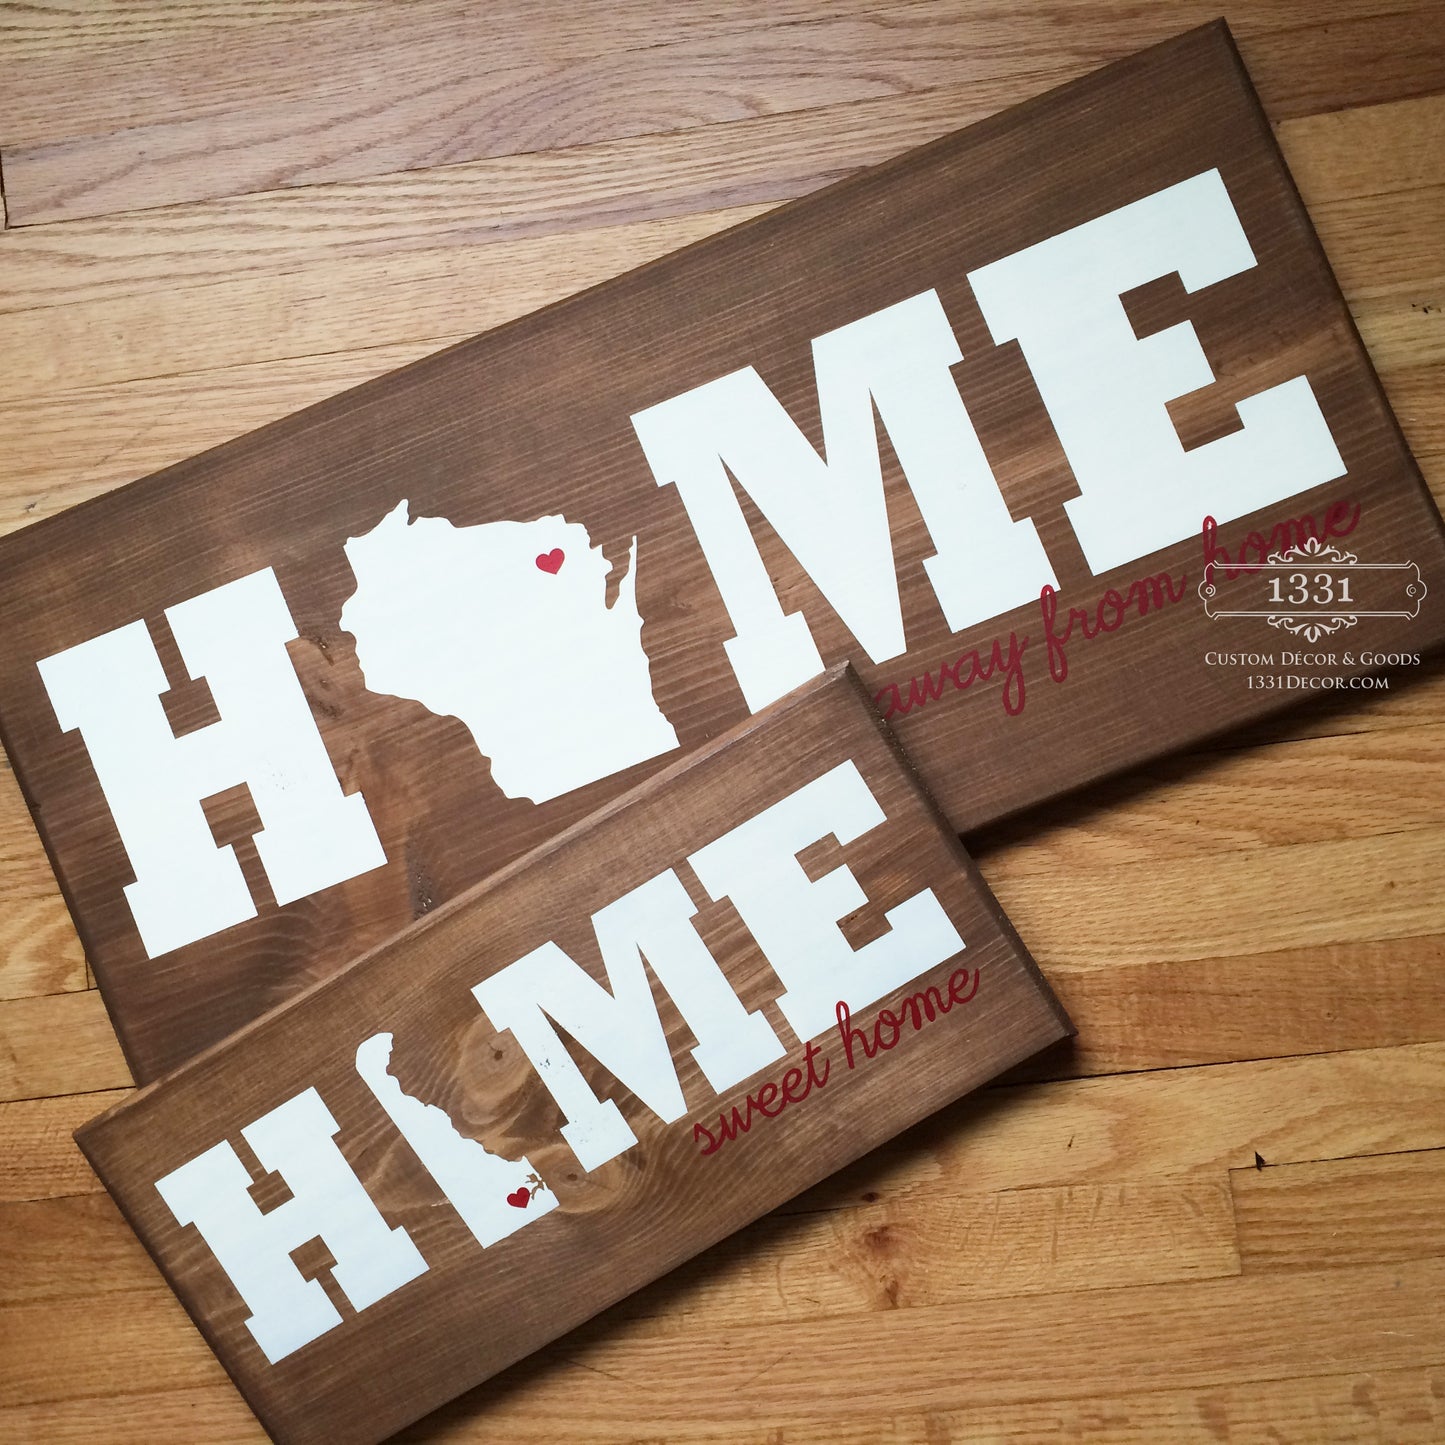 Home Sweet Home, State, Home Sweet Home sign, State Outline, State Sign, City and State sign, Housewarming Gift, Home State Sign